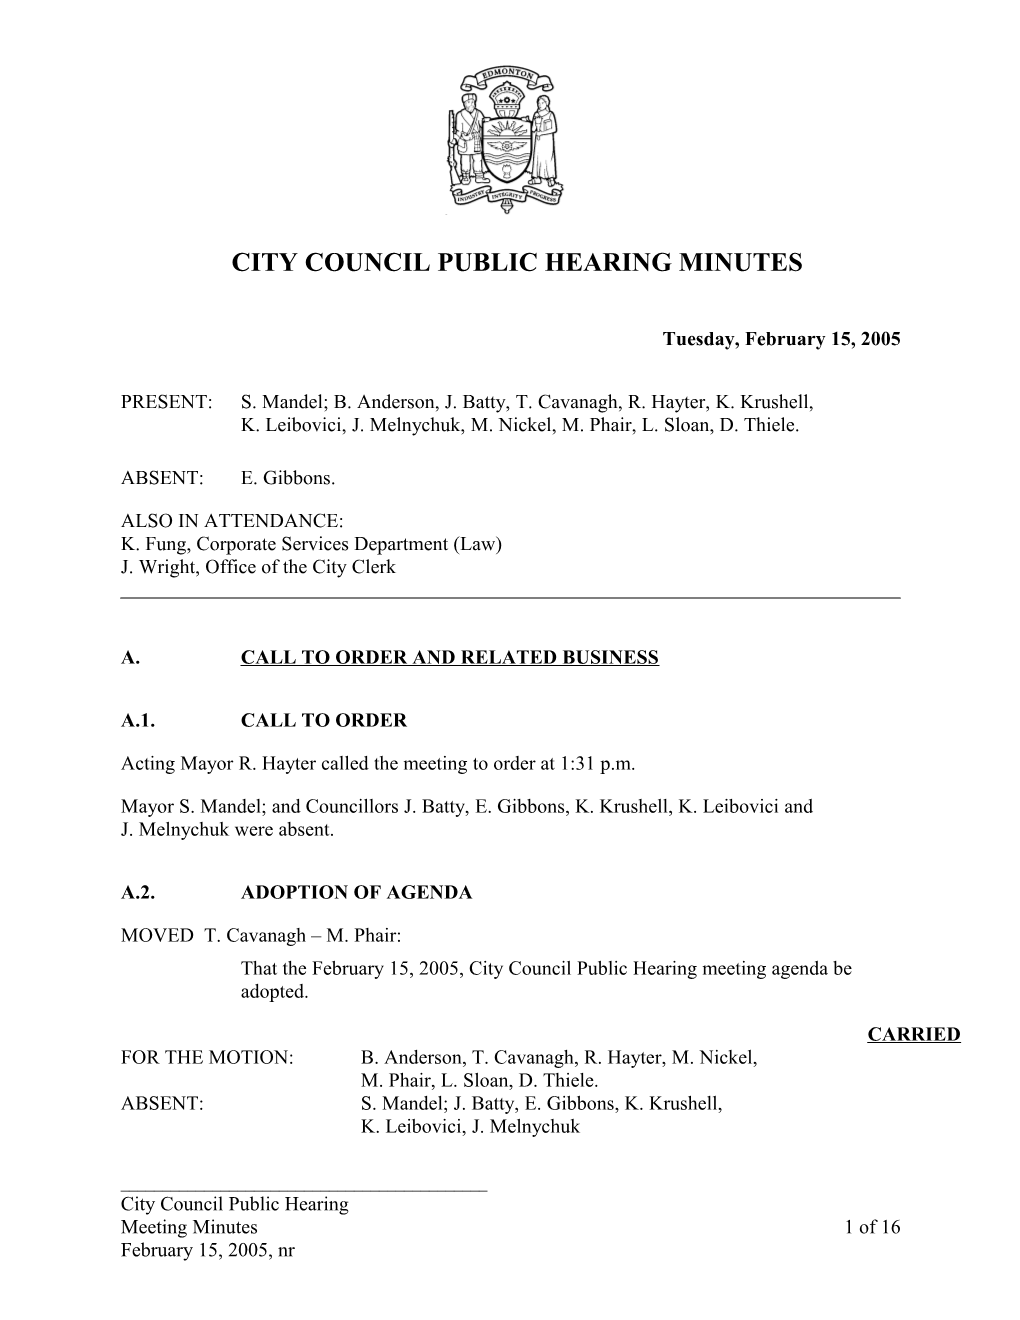 Minutes for City Council February 15, 2005 Meeting